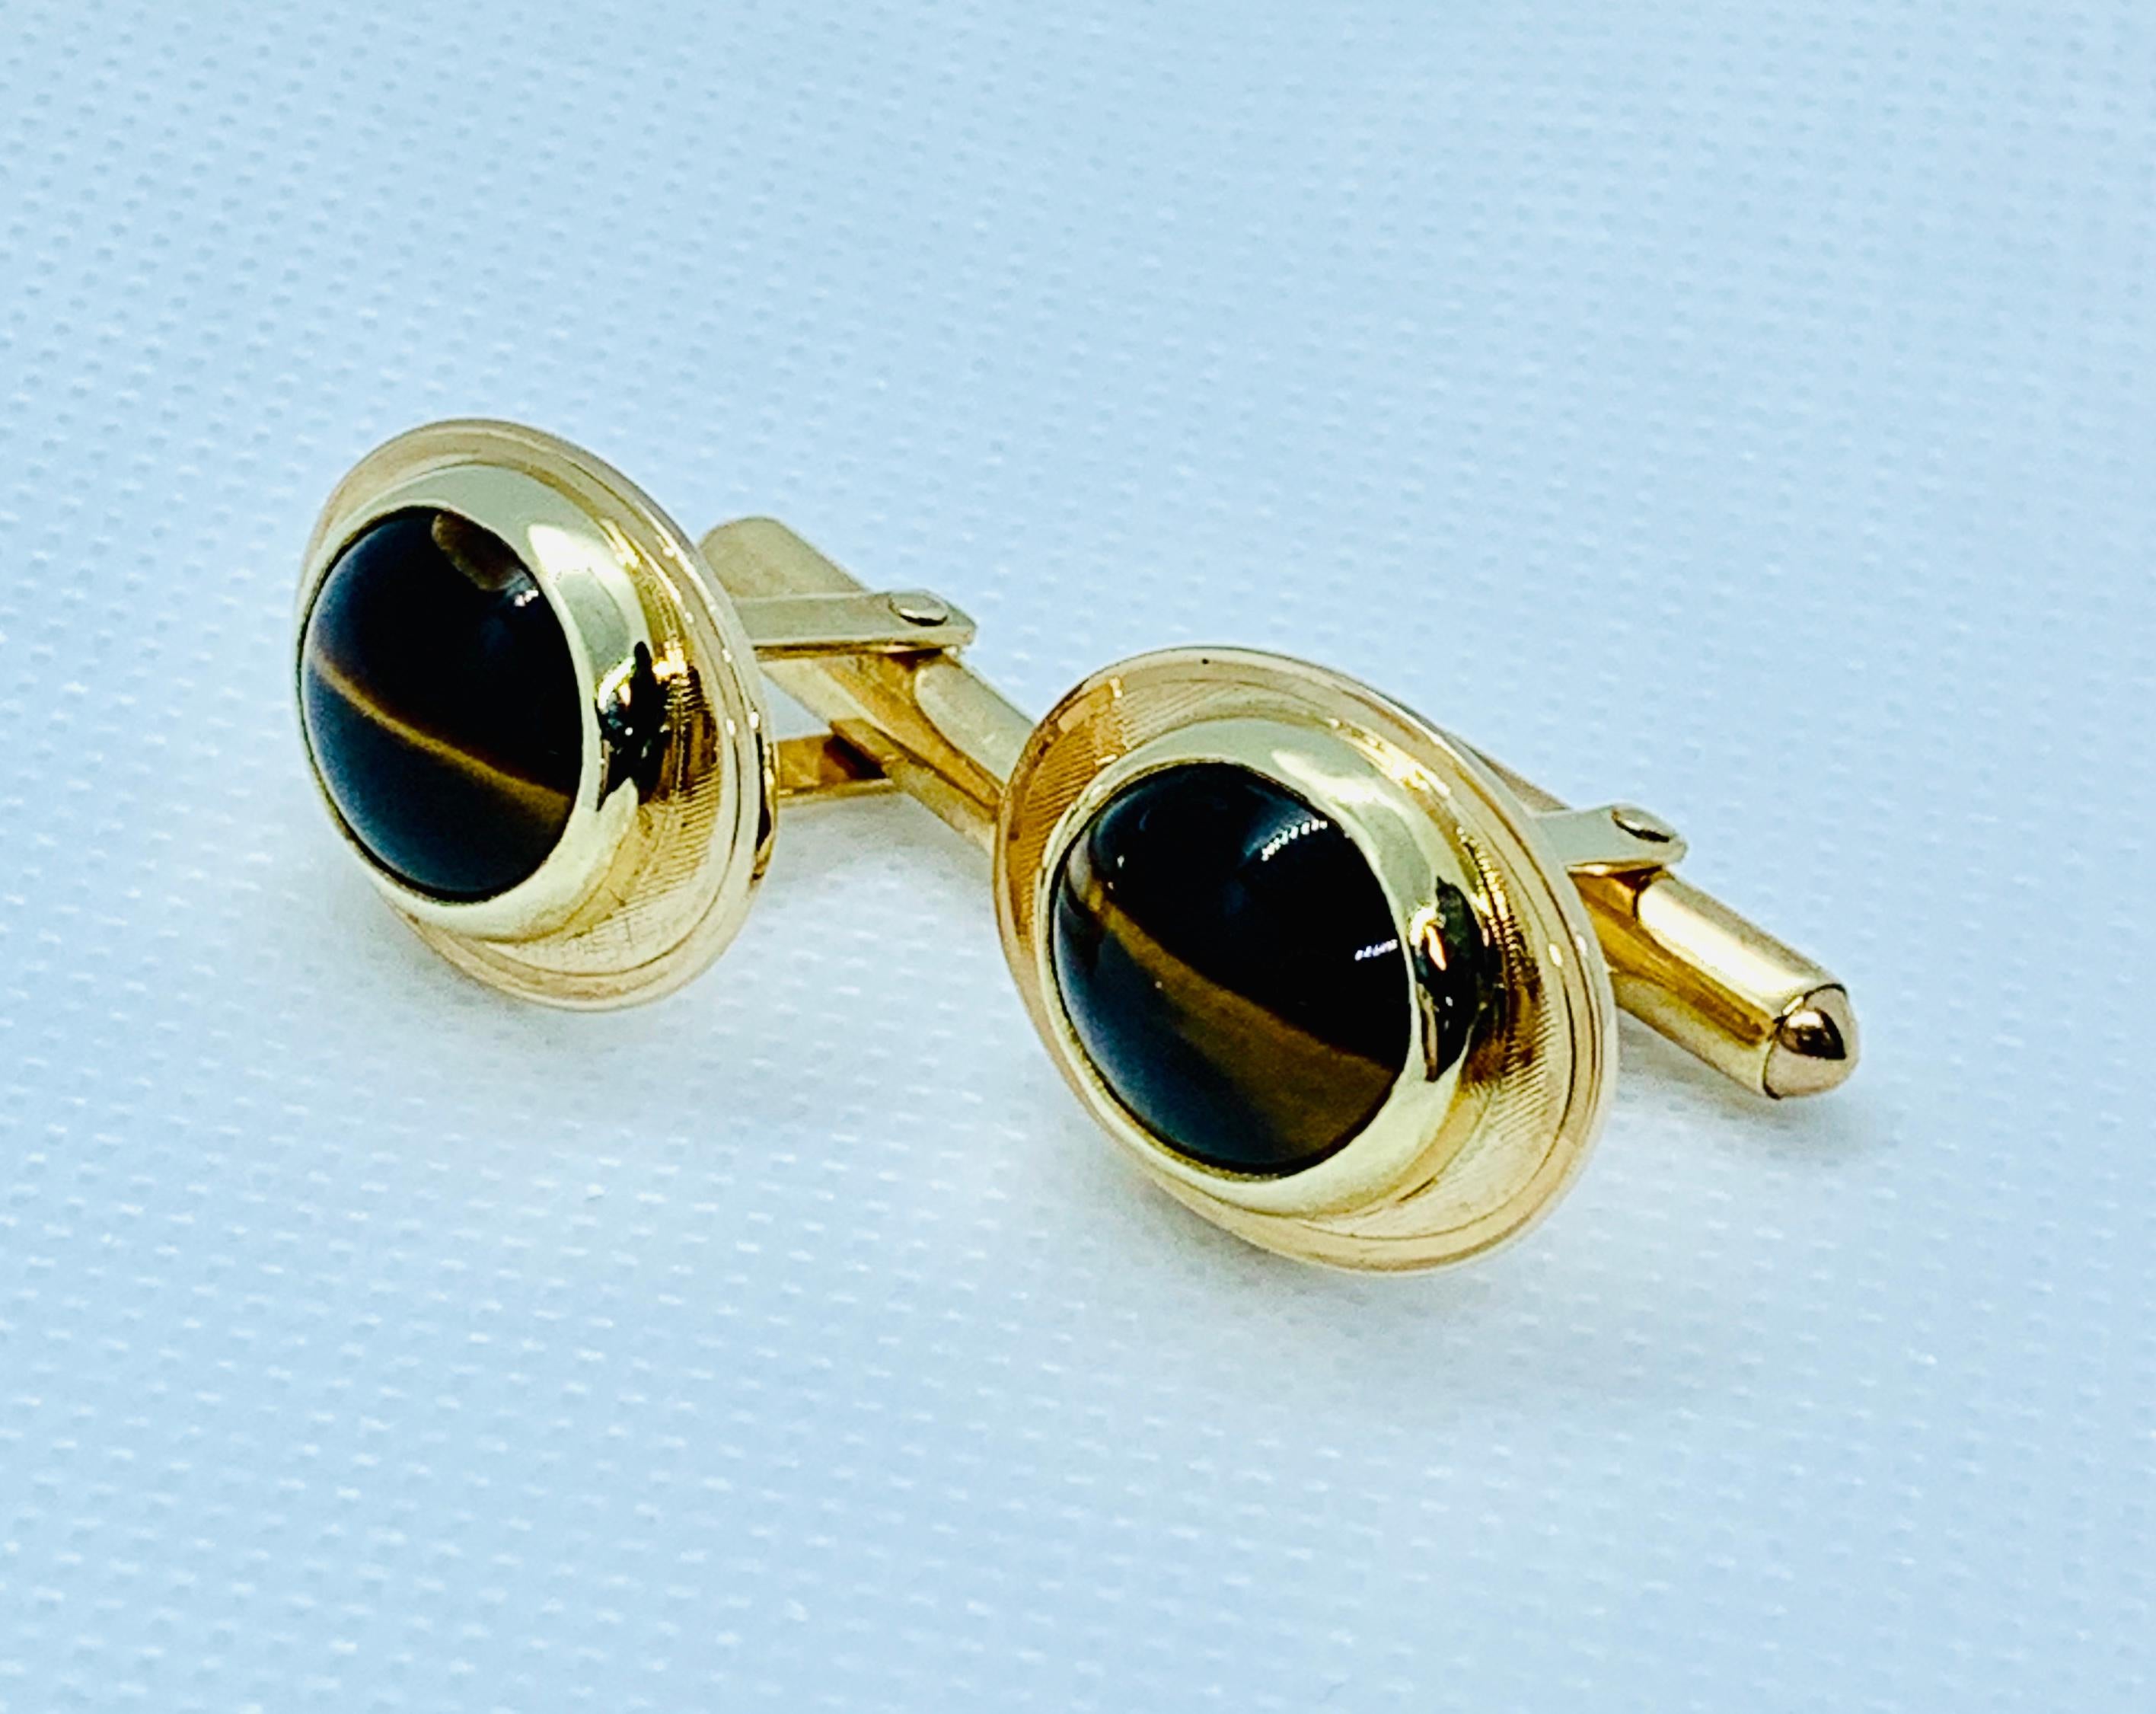 Very Handsome Tiger's Eye Cufflinks! These feature oval Tiger's Eye Center stones that are set in solid 14k yellow gold links that have a florentine finish.